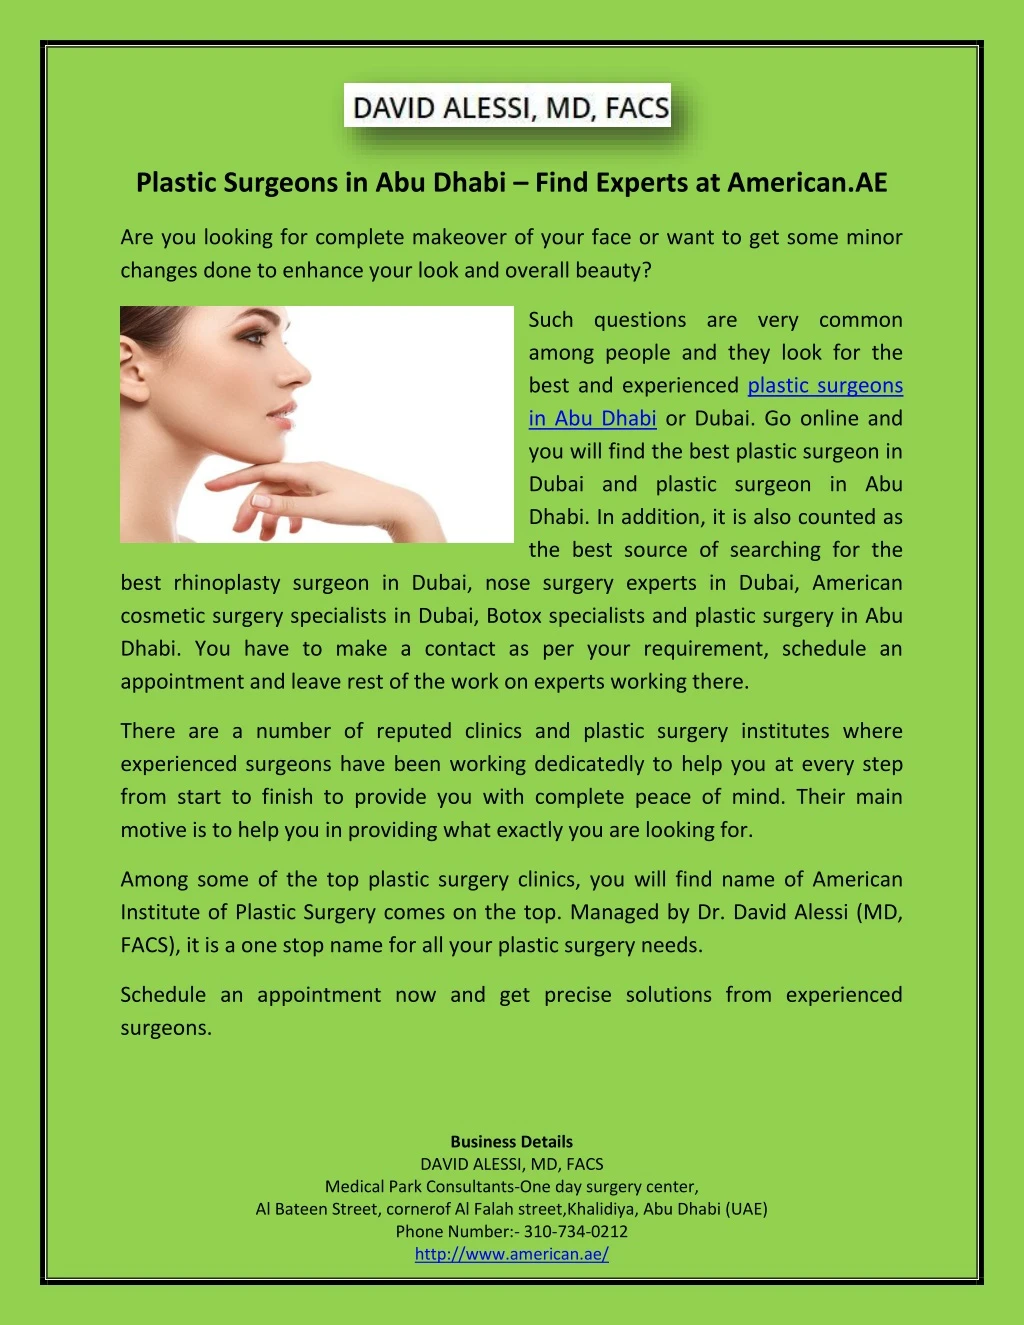 plastic surgeons in abu dhabi find experts